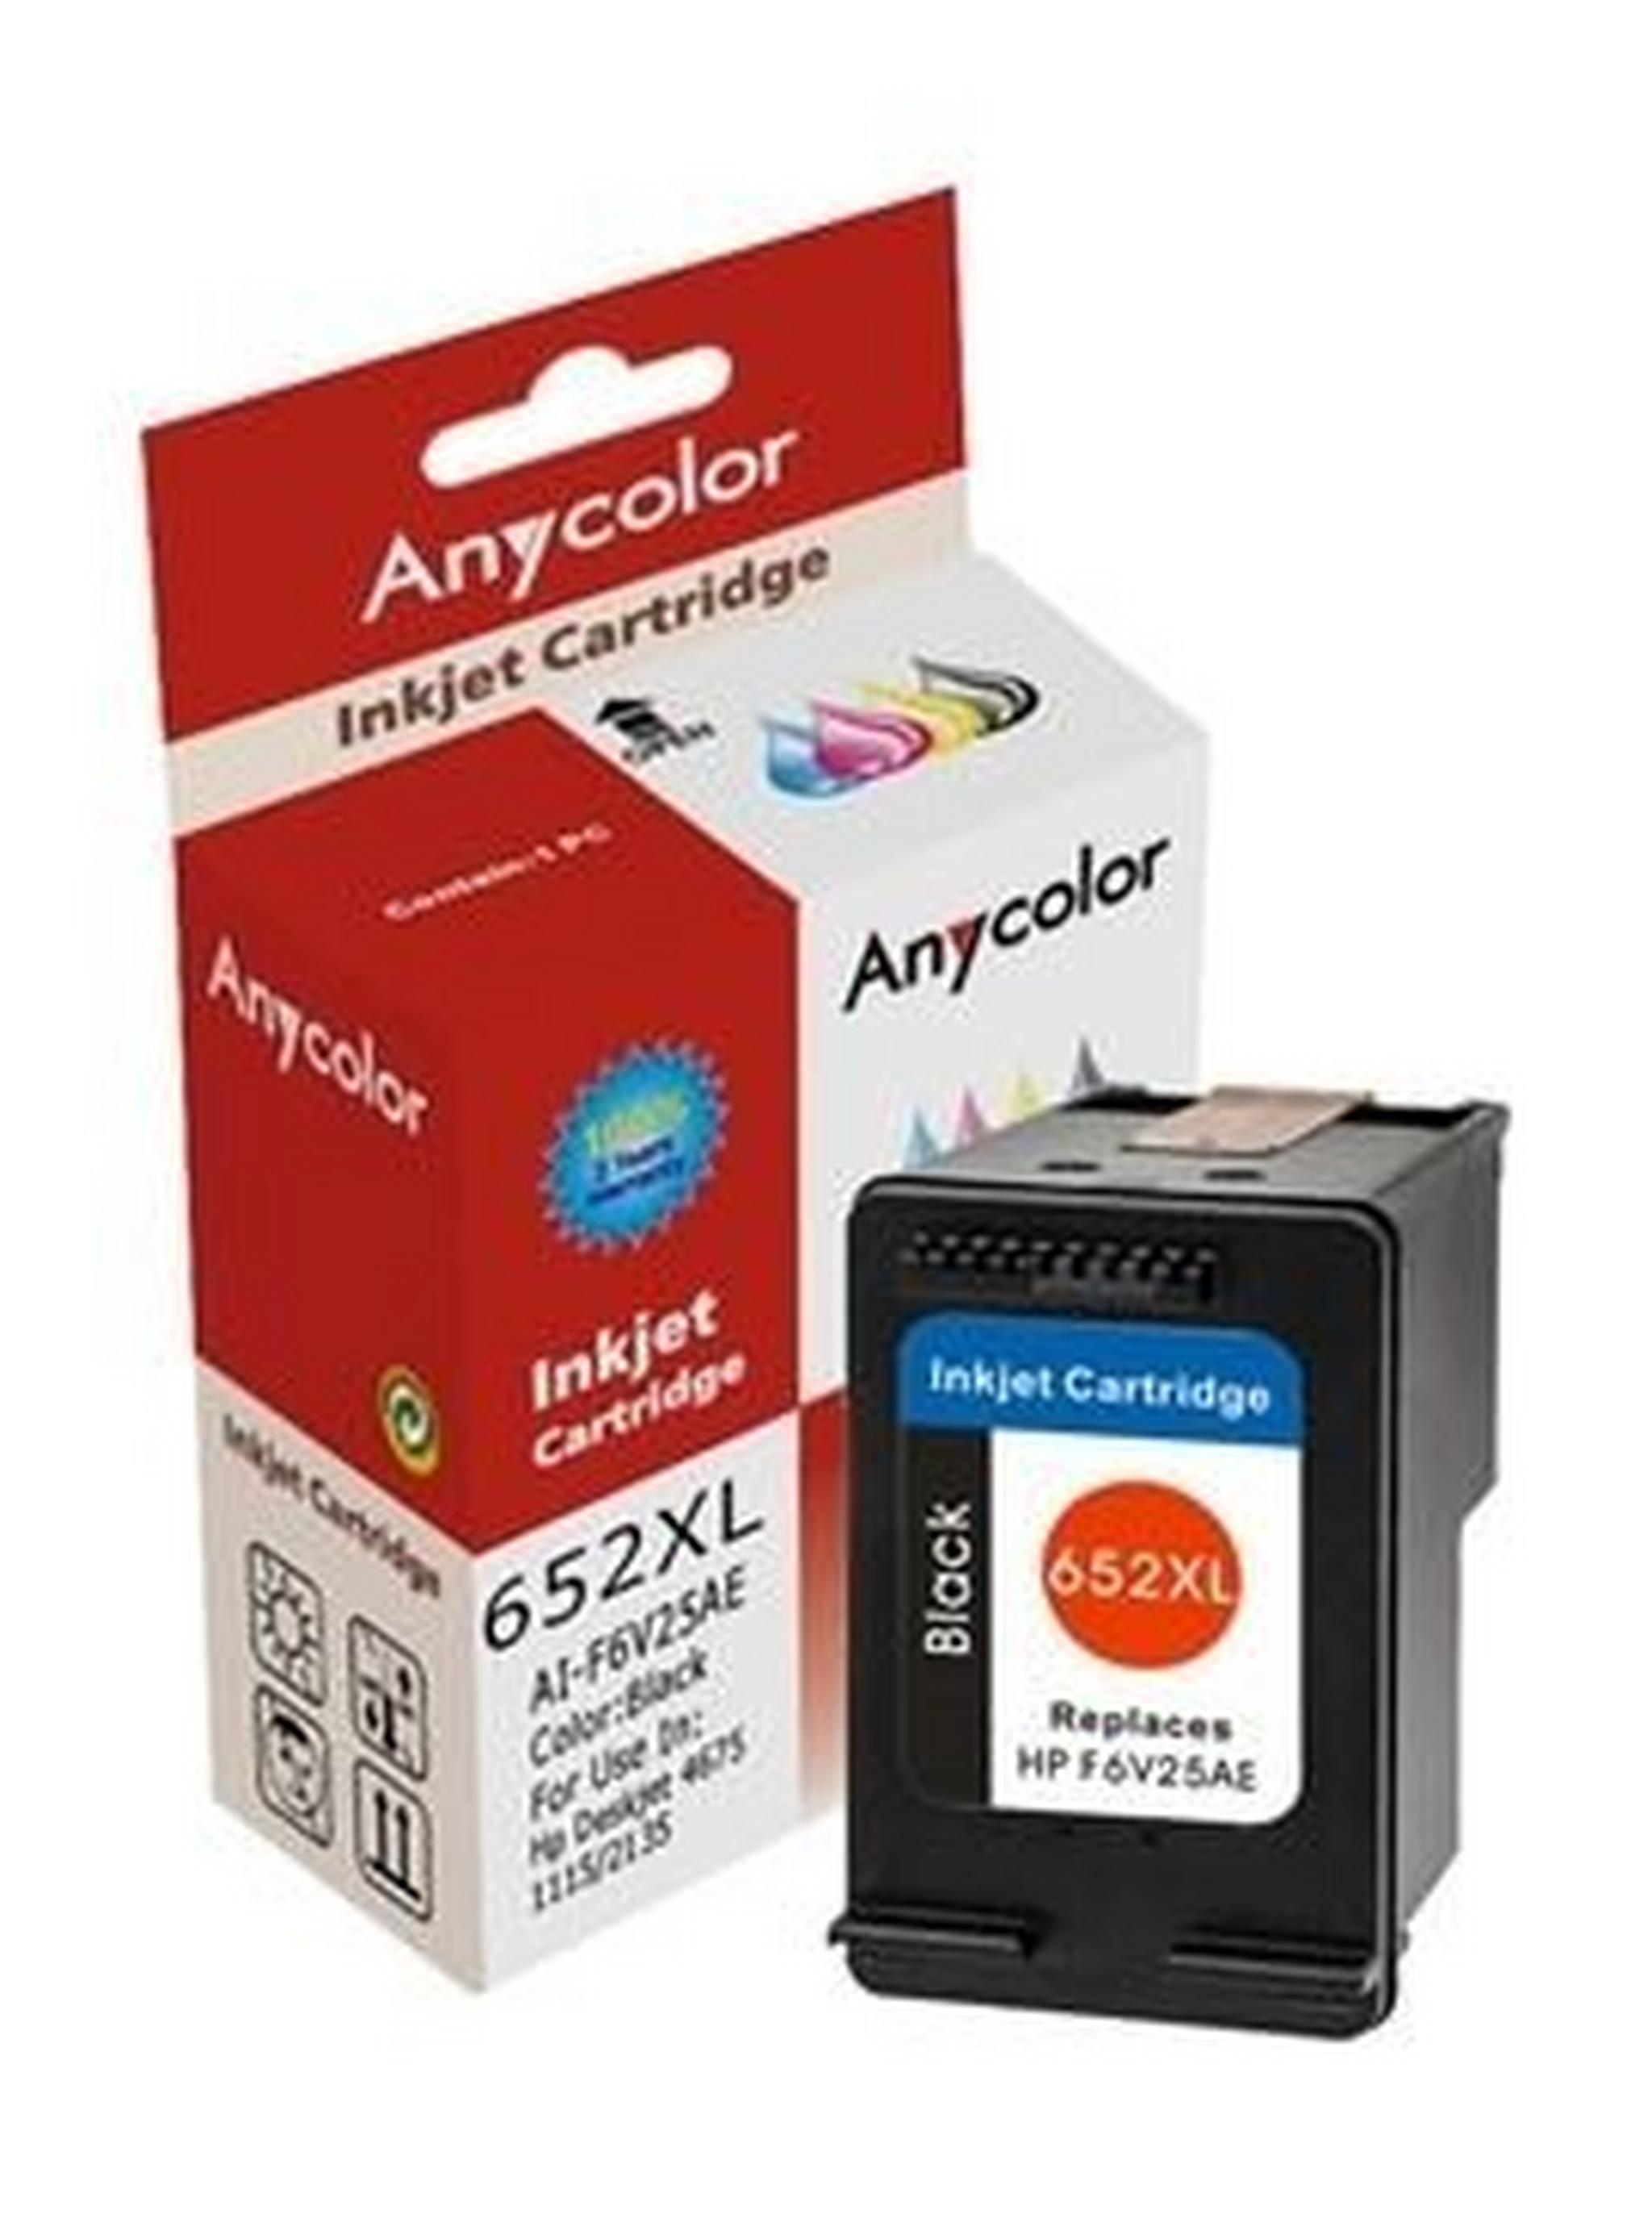 AnyColor 652XL Black Inkjet 800 Page Yield Printer Cartridge - F6V25AE